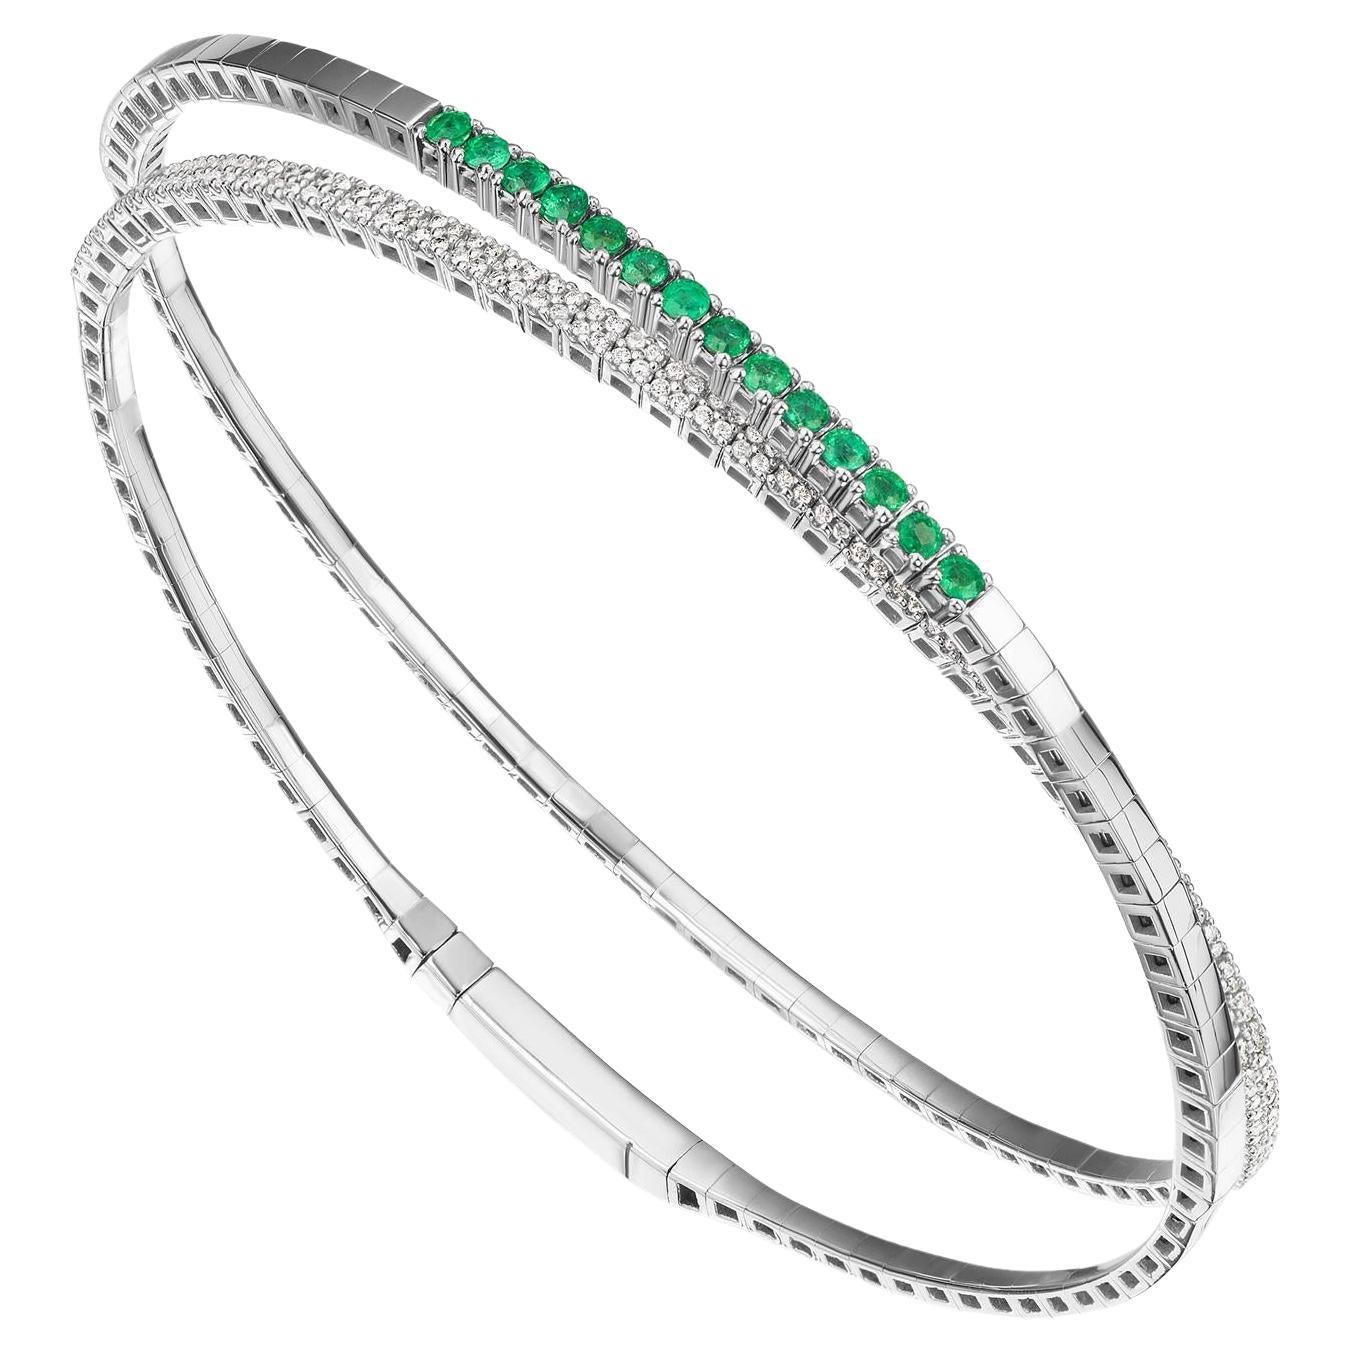 Gemistry 0.65cttw. Emerald and Diamond Rolling Bangle in 18k White Gold For Sale